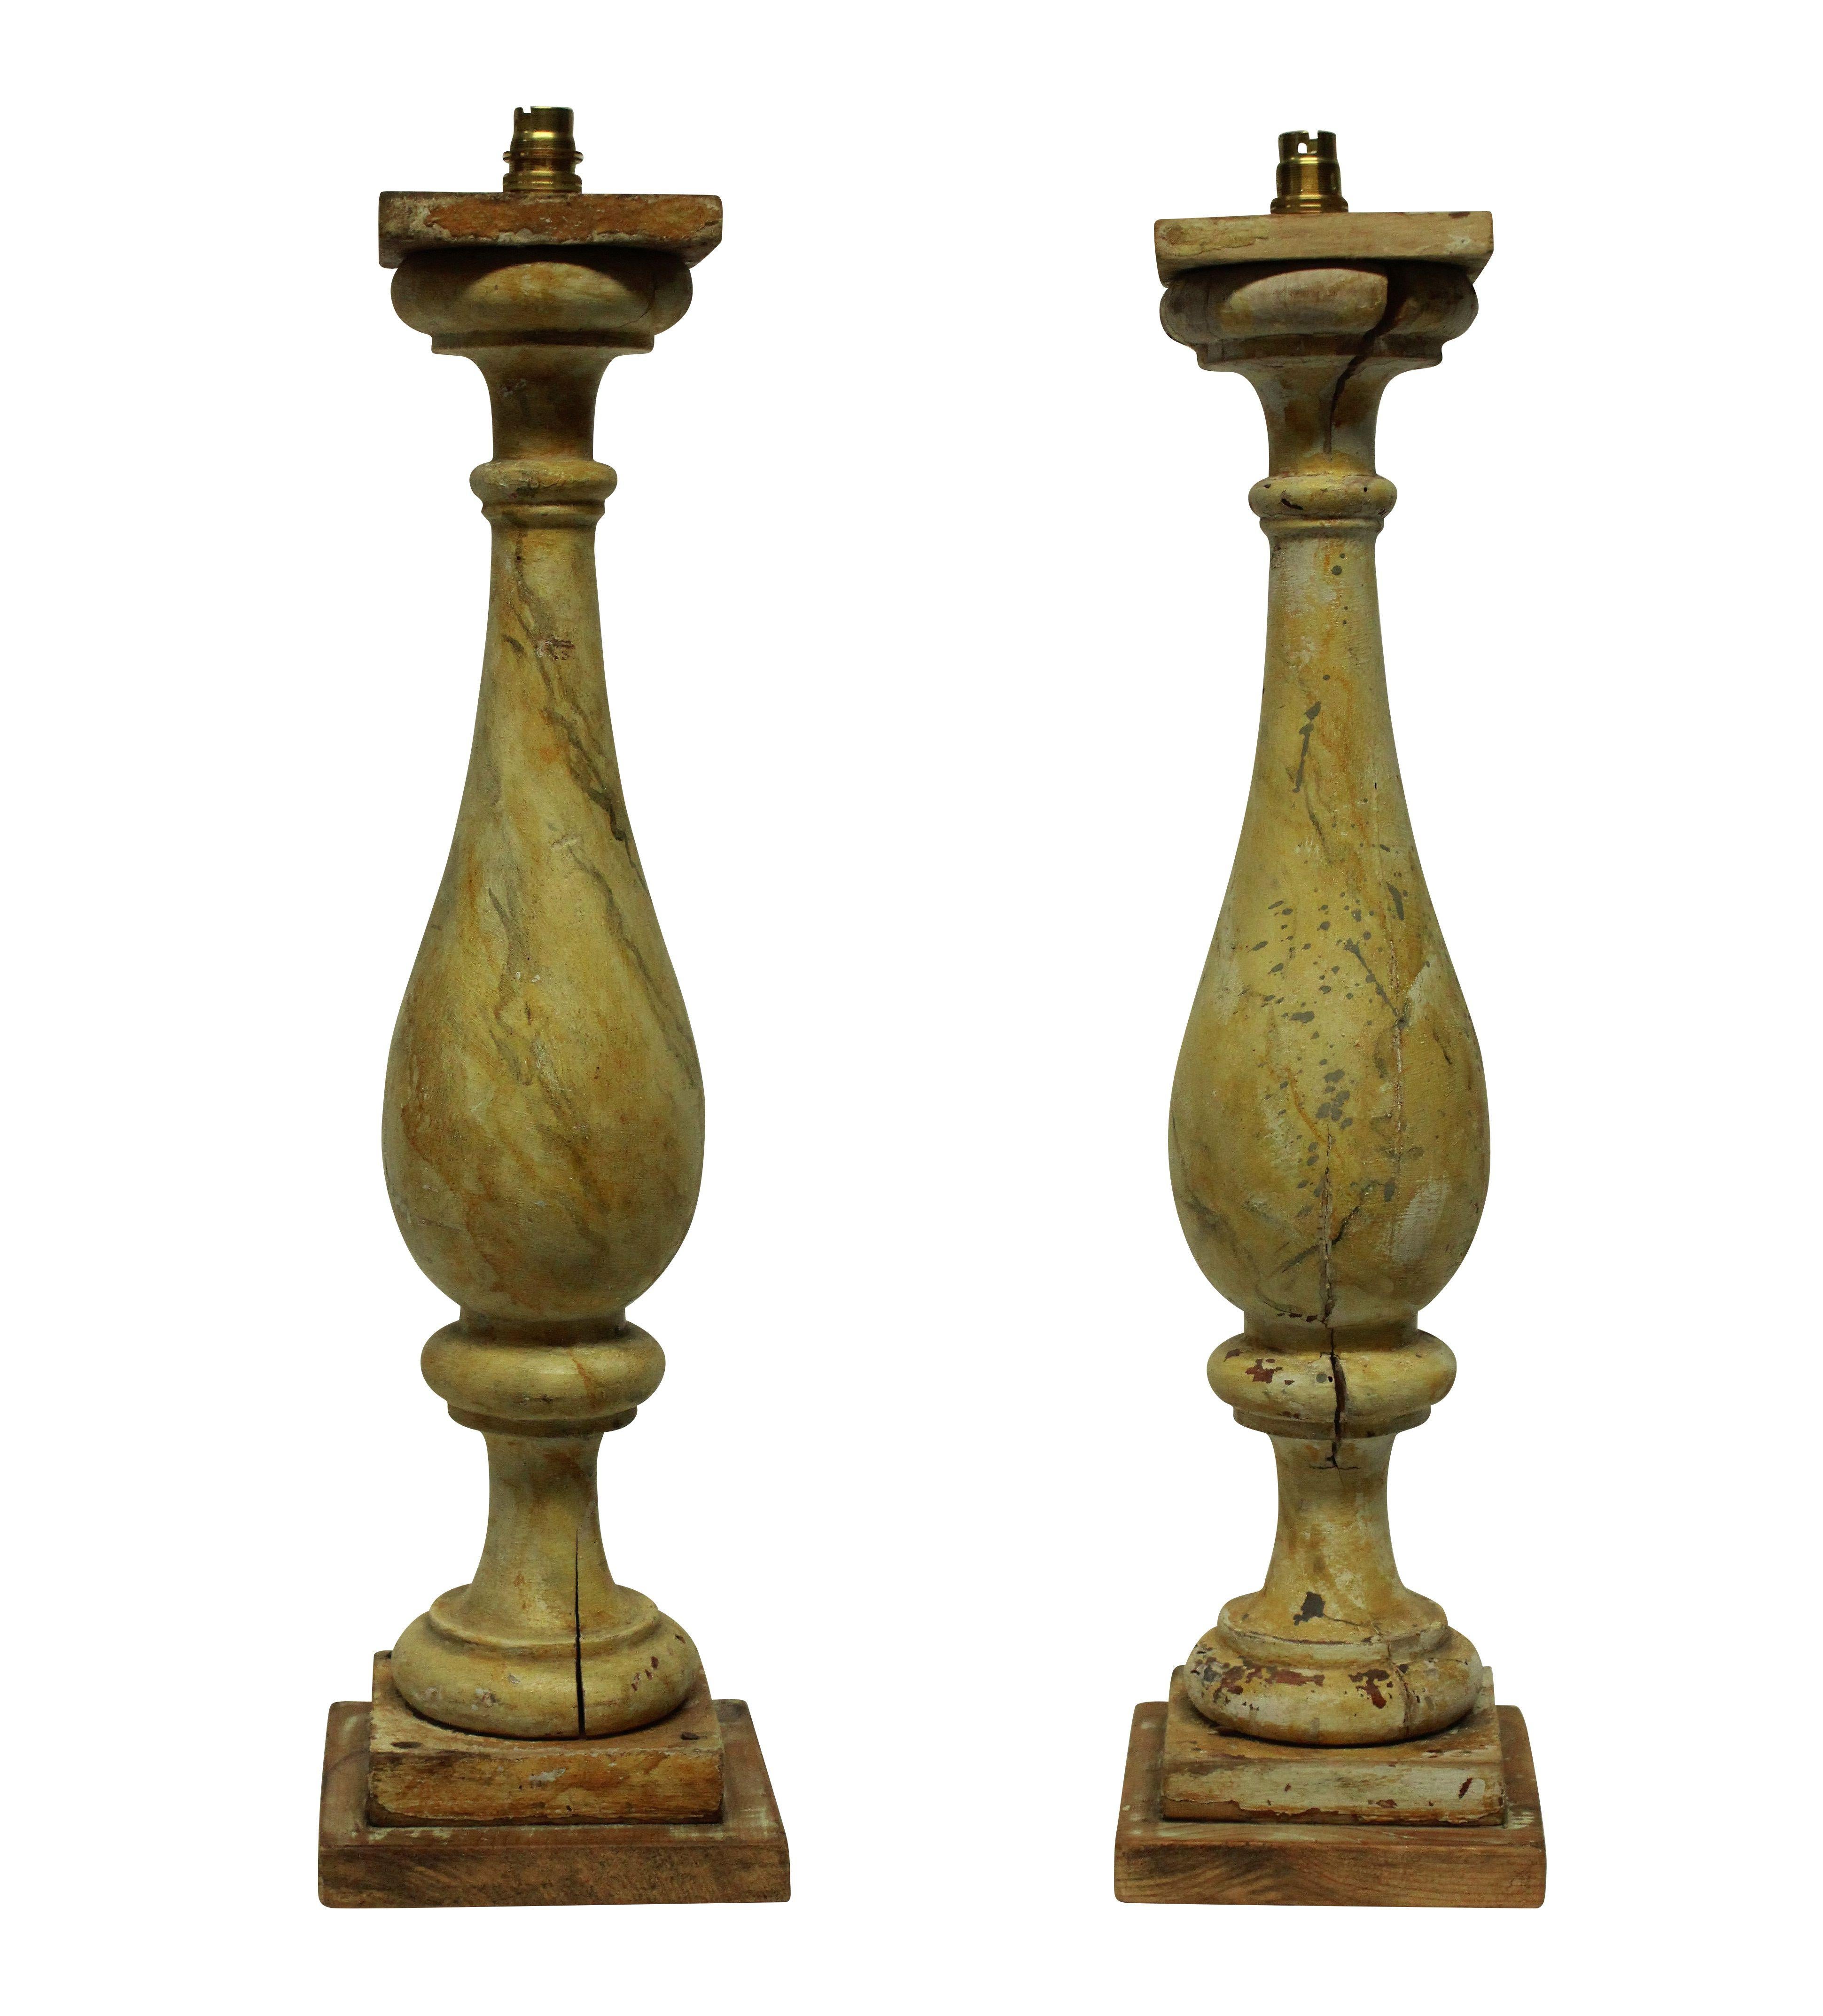 Hand-Painted Pair of Large 19th Century Painted Balustrade Lamps